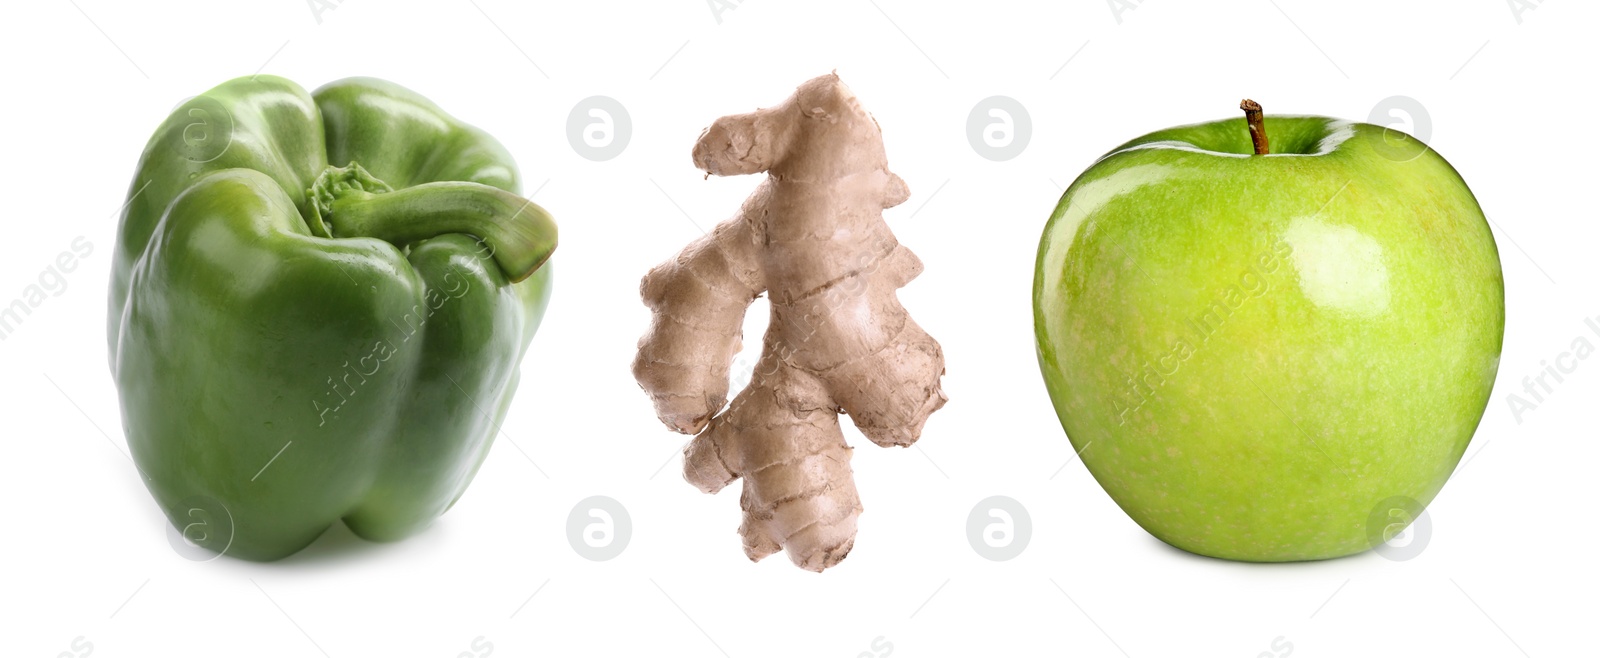 Image of Foods for healthy digestion, collage. Green bell pepper, ginger and apples on white background